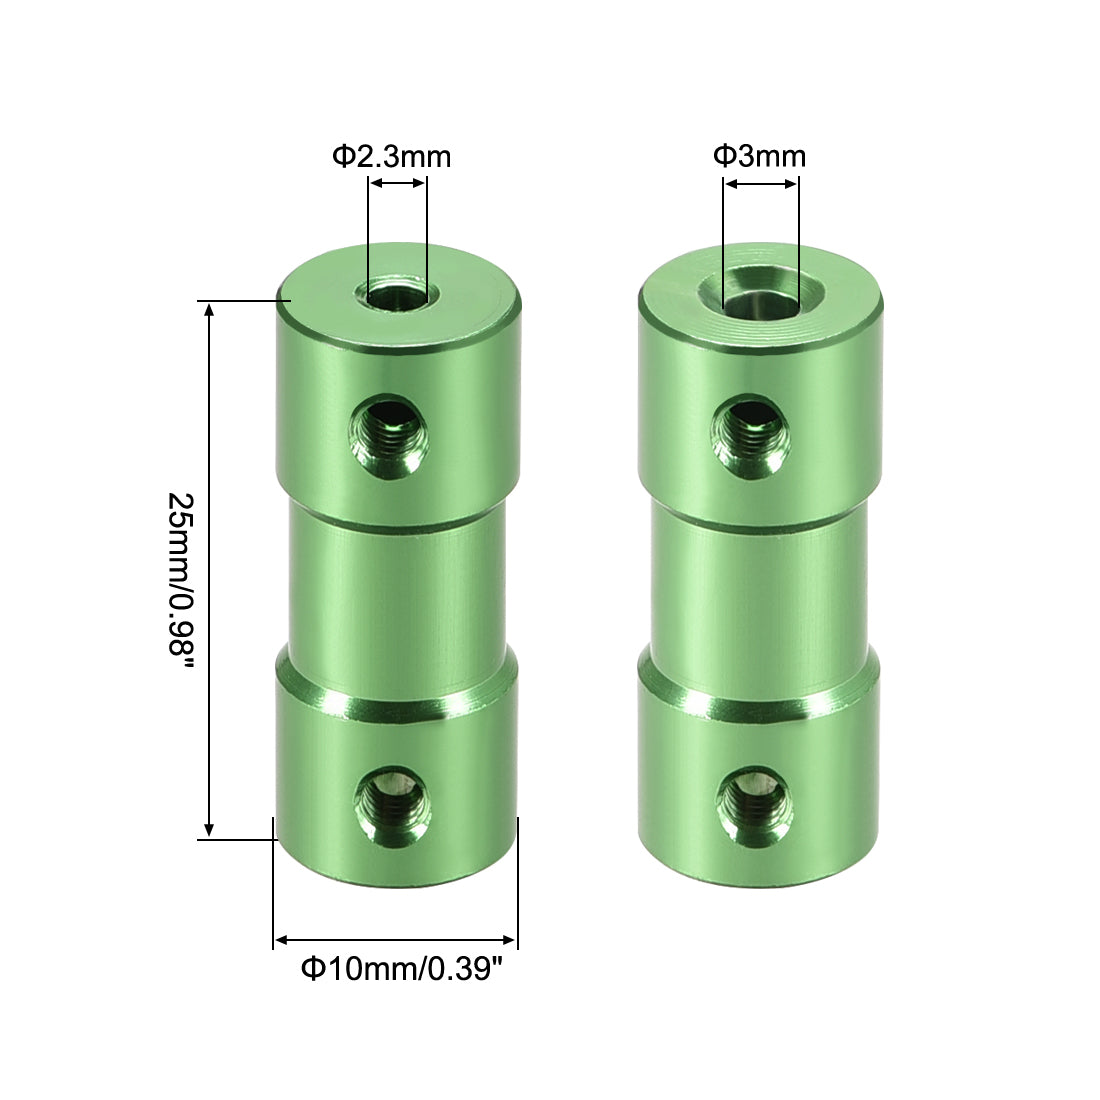 Uxcell Uxcell 3mm to 3.17mm Bore Rigid Coupling 25mm Length 10mm Diameter Aluminum Alloy Shaft Coupler Connector Green 2pcs